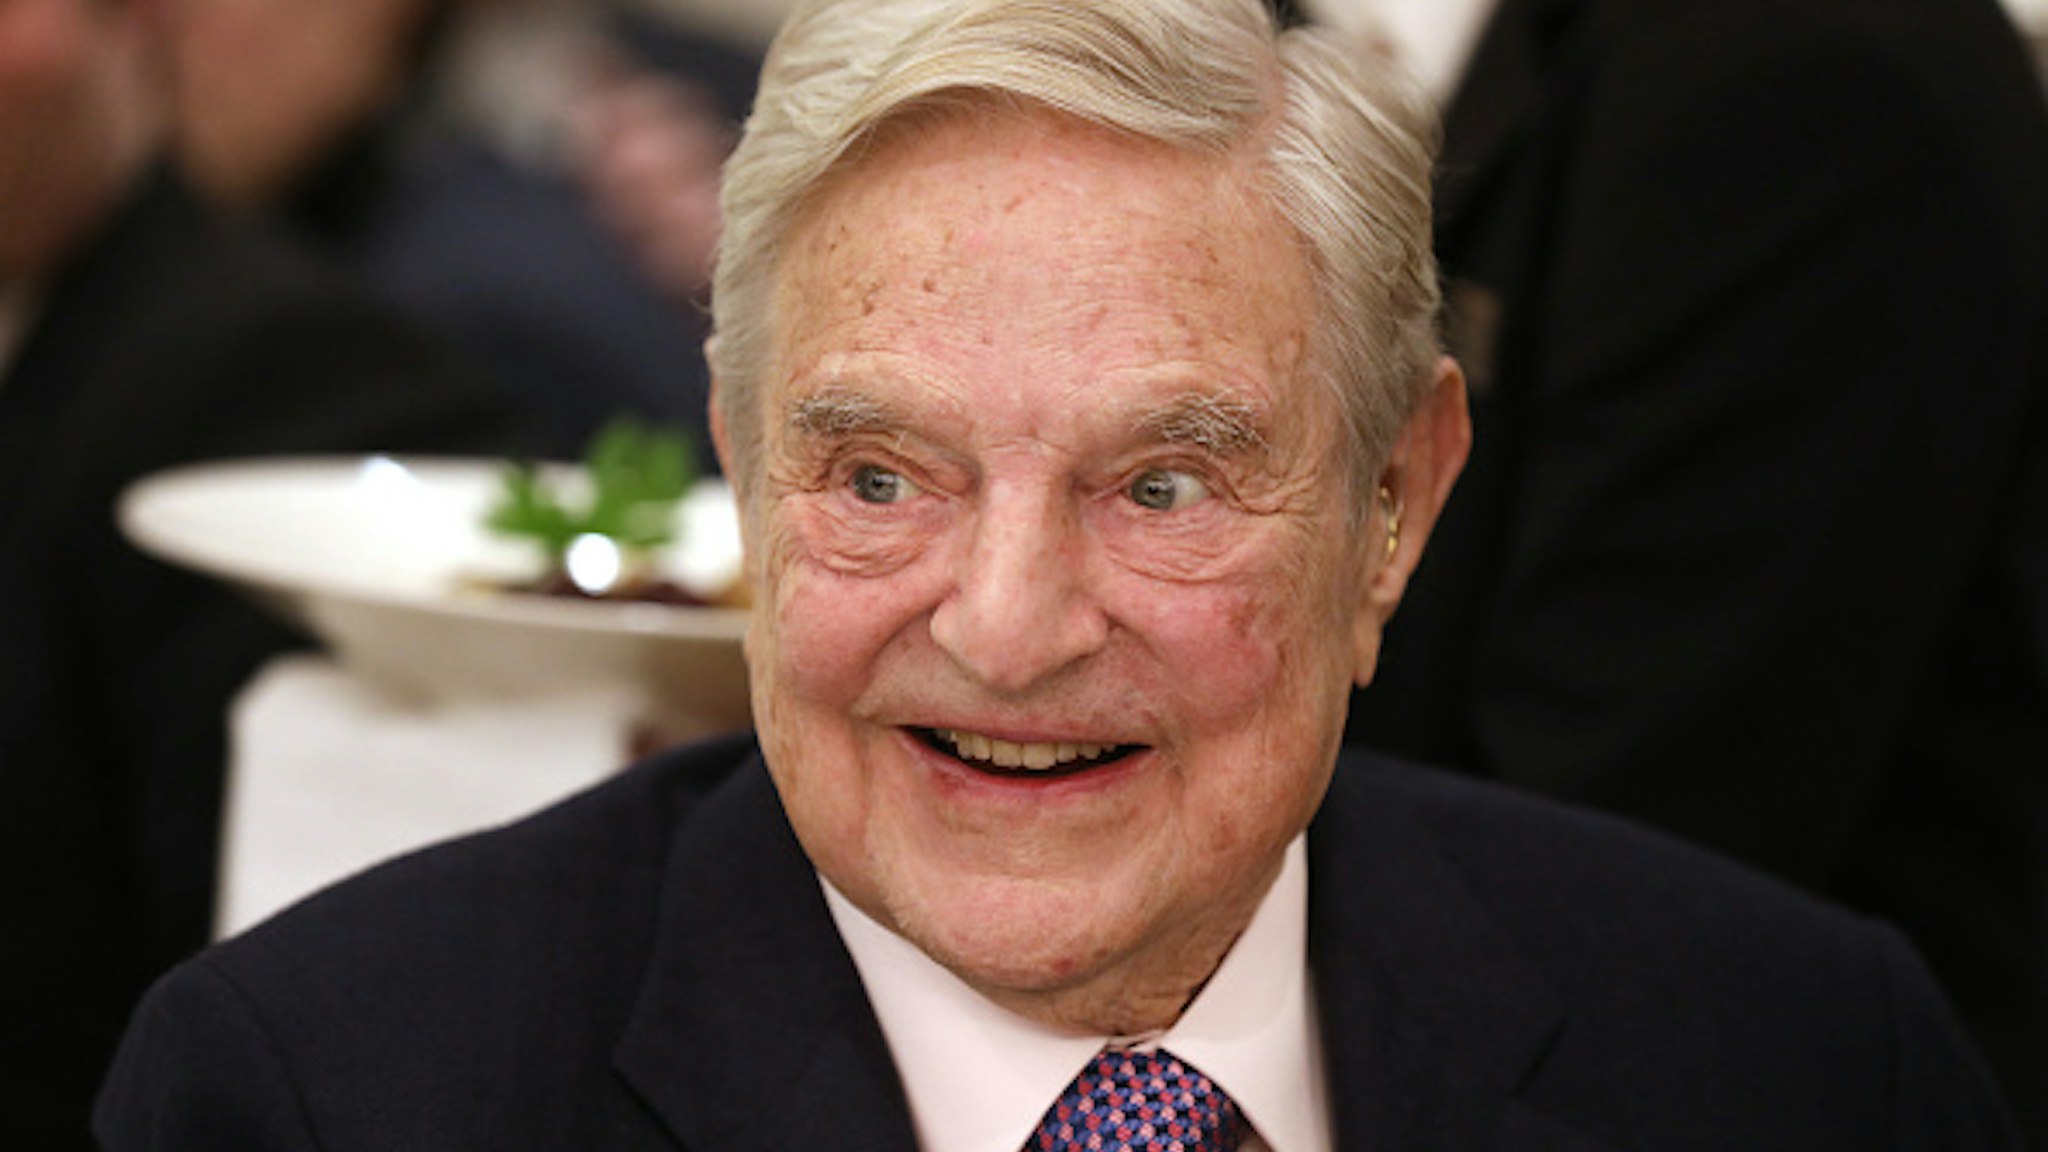 George Soros, billionaire and founder of Soros Fund Management LLC, smiles before speaking at an event on day three of the World Economic Forum (WEF) in Davos, Switzerland, on Thursday, Jan. 24, 2019. World leaders, influential executives, bankers and policy makers attend the 49th annual meeting of the World Economic Forum in Davos from Jan. 22 - 25.